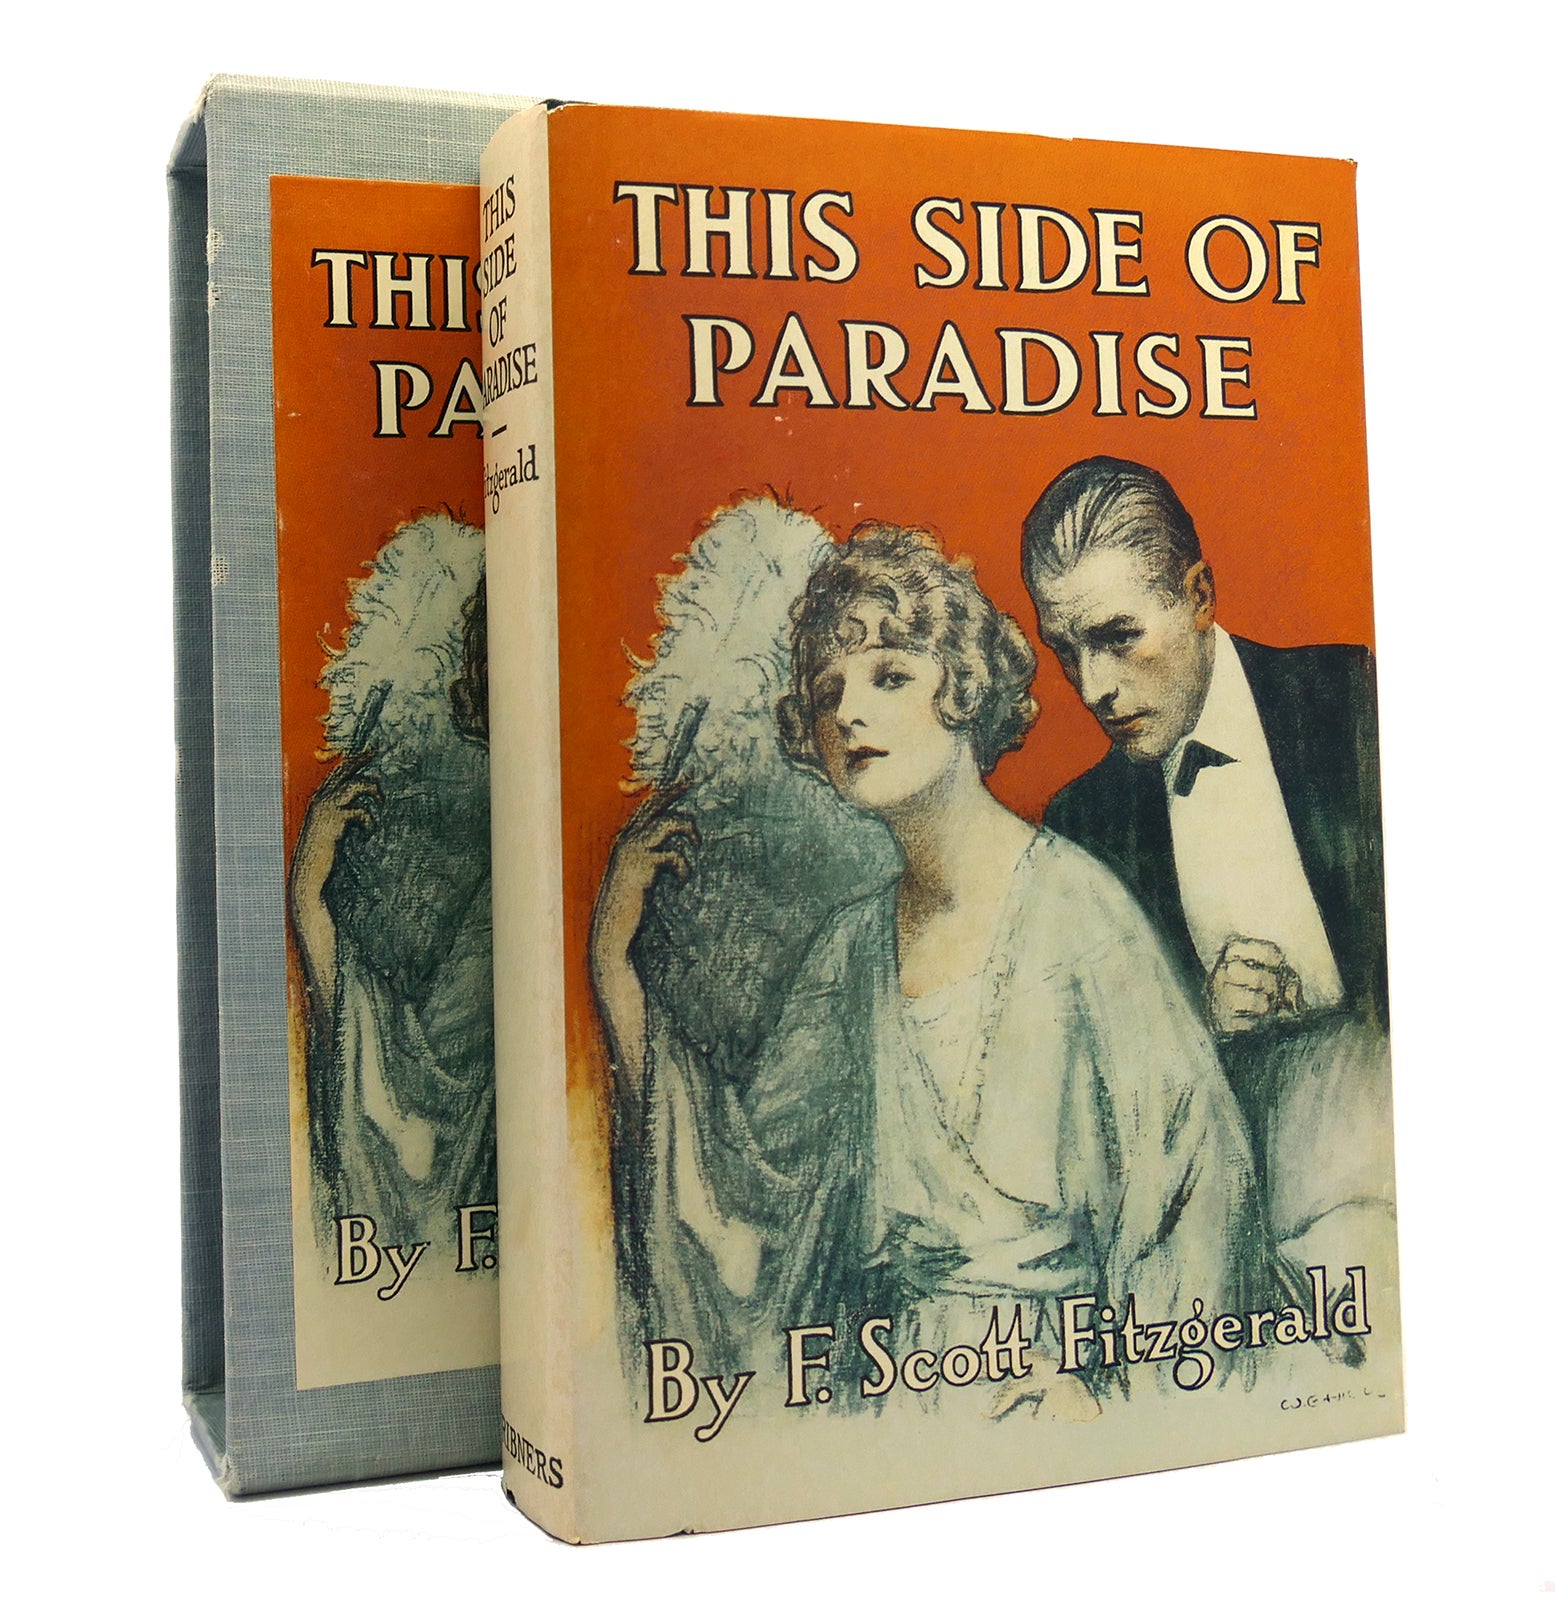 Library　First　The　THIS　First　The　F.　SIDE　First　FEL;　FEL　OF　Edition　PARADISE　Library　Scott　Fitzgerald　Edition　Printing